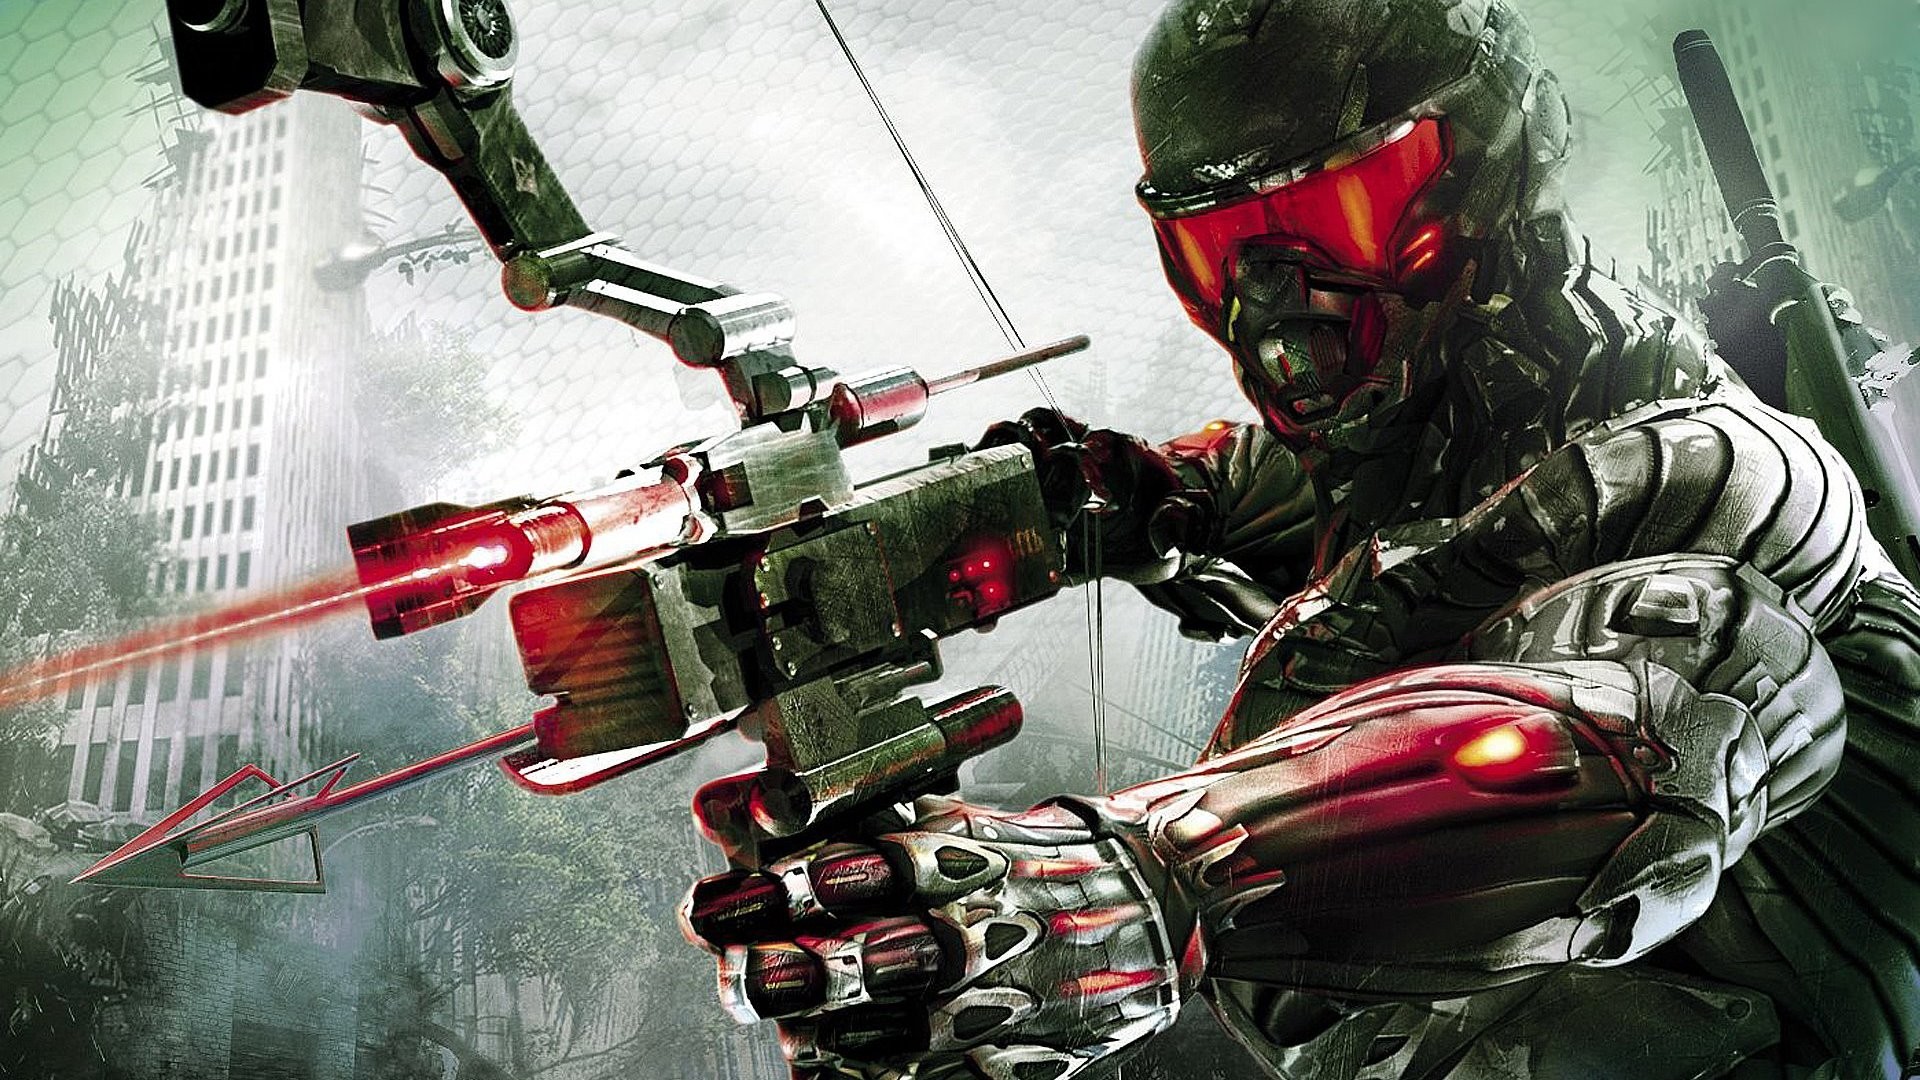 Crysis 3 Hd Wallpaper - Crysis 3 Hd Wallpaper For Mobile , HD Wallpaper & Backgrounds